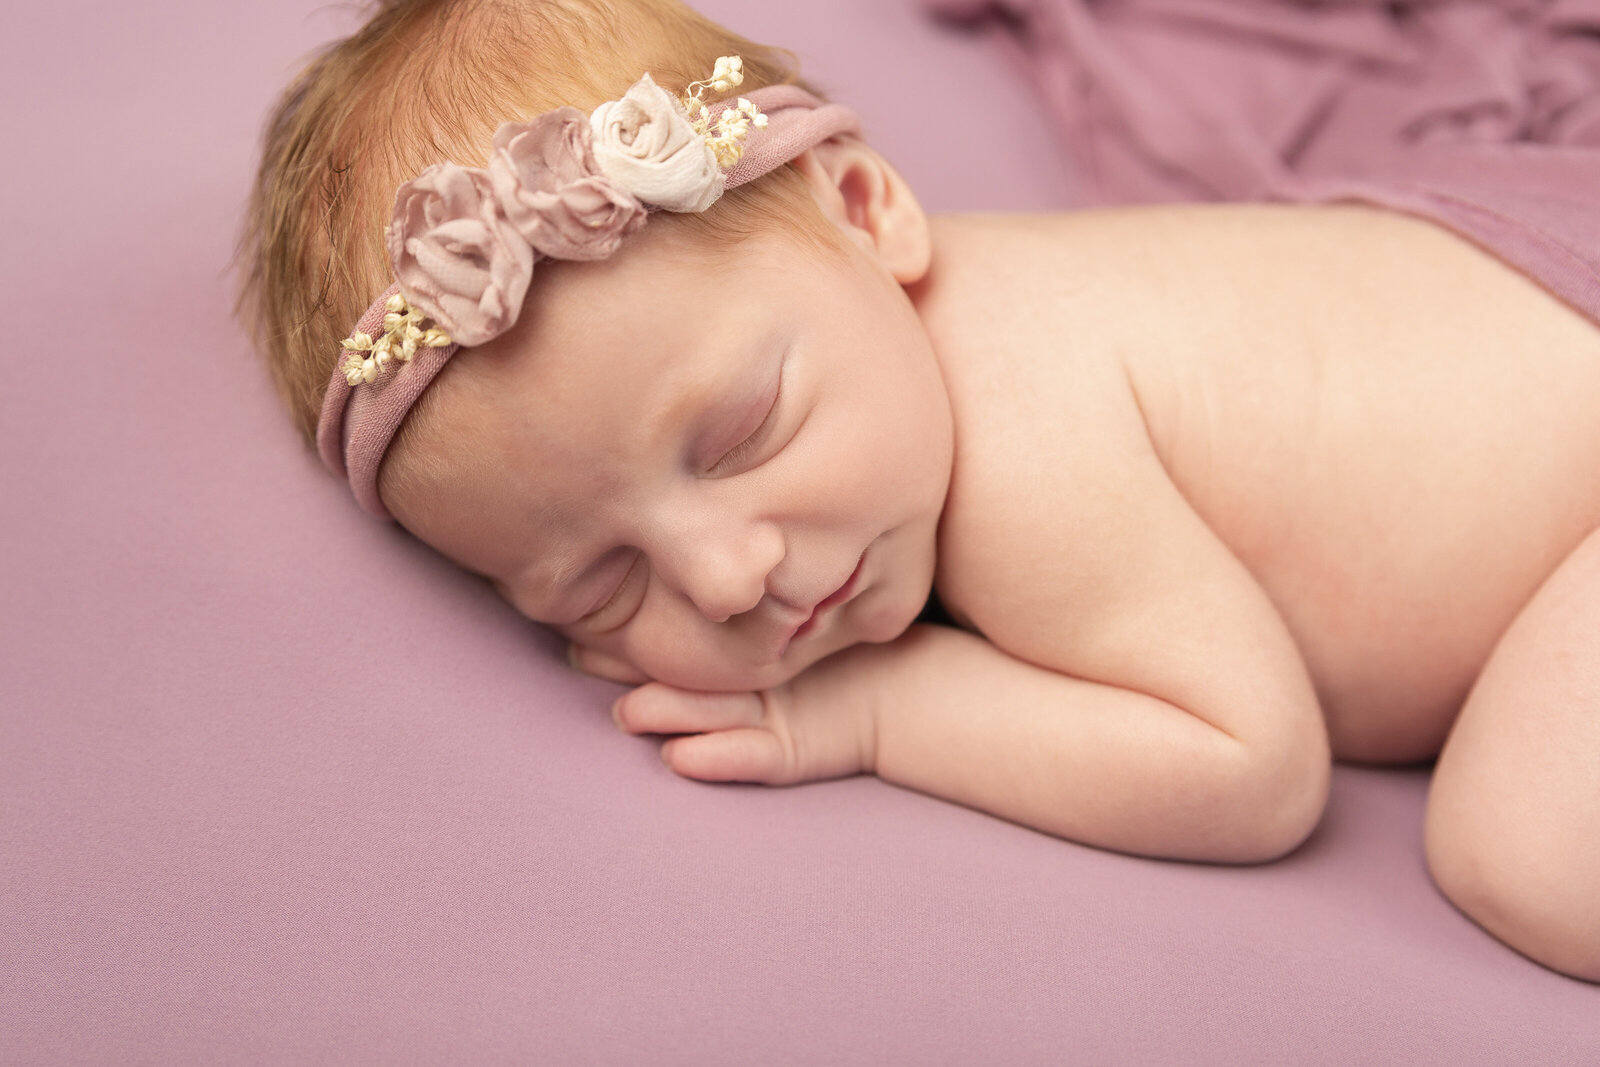 Charlotte  Newborn baby girl portrait wearing a pink headband with flowers laying down sleeping on a matching pink blanket, almost appears to smile, white baby with bright read hair